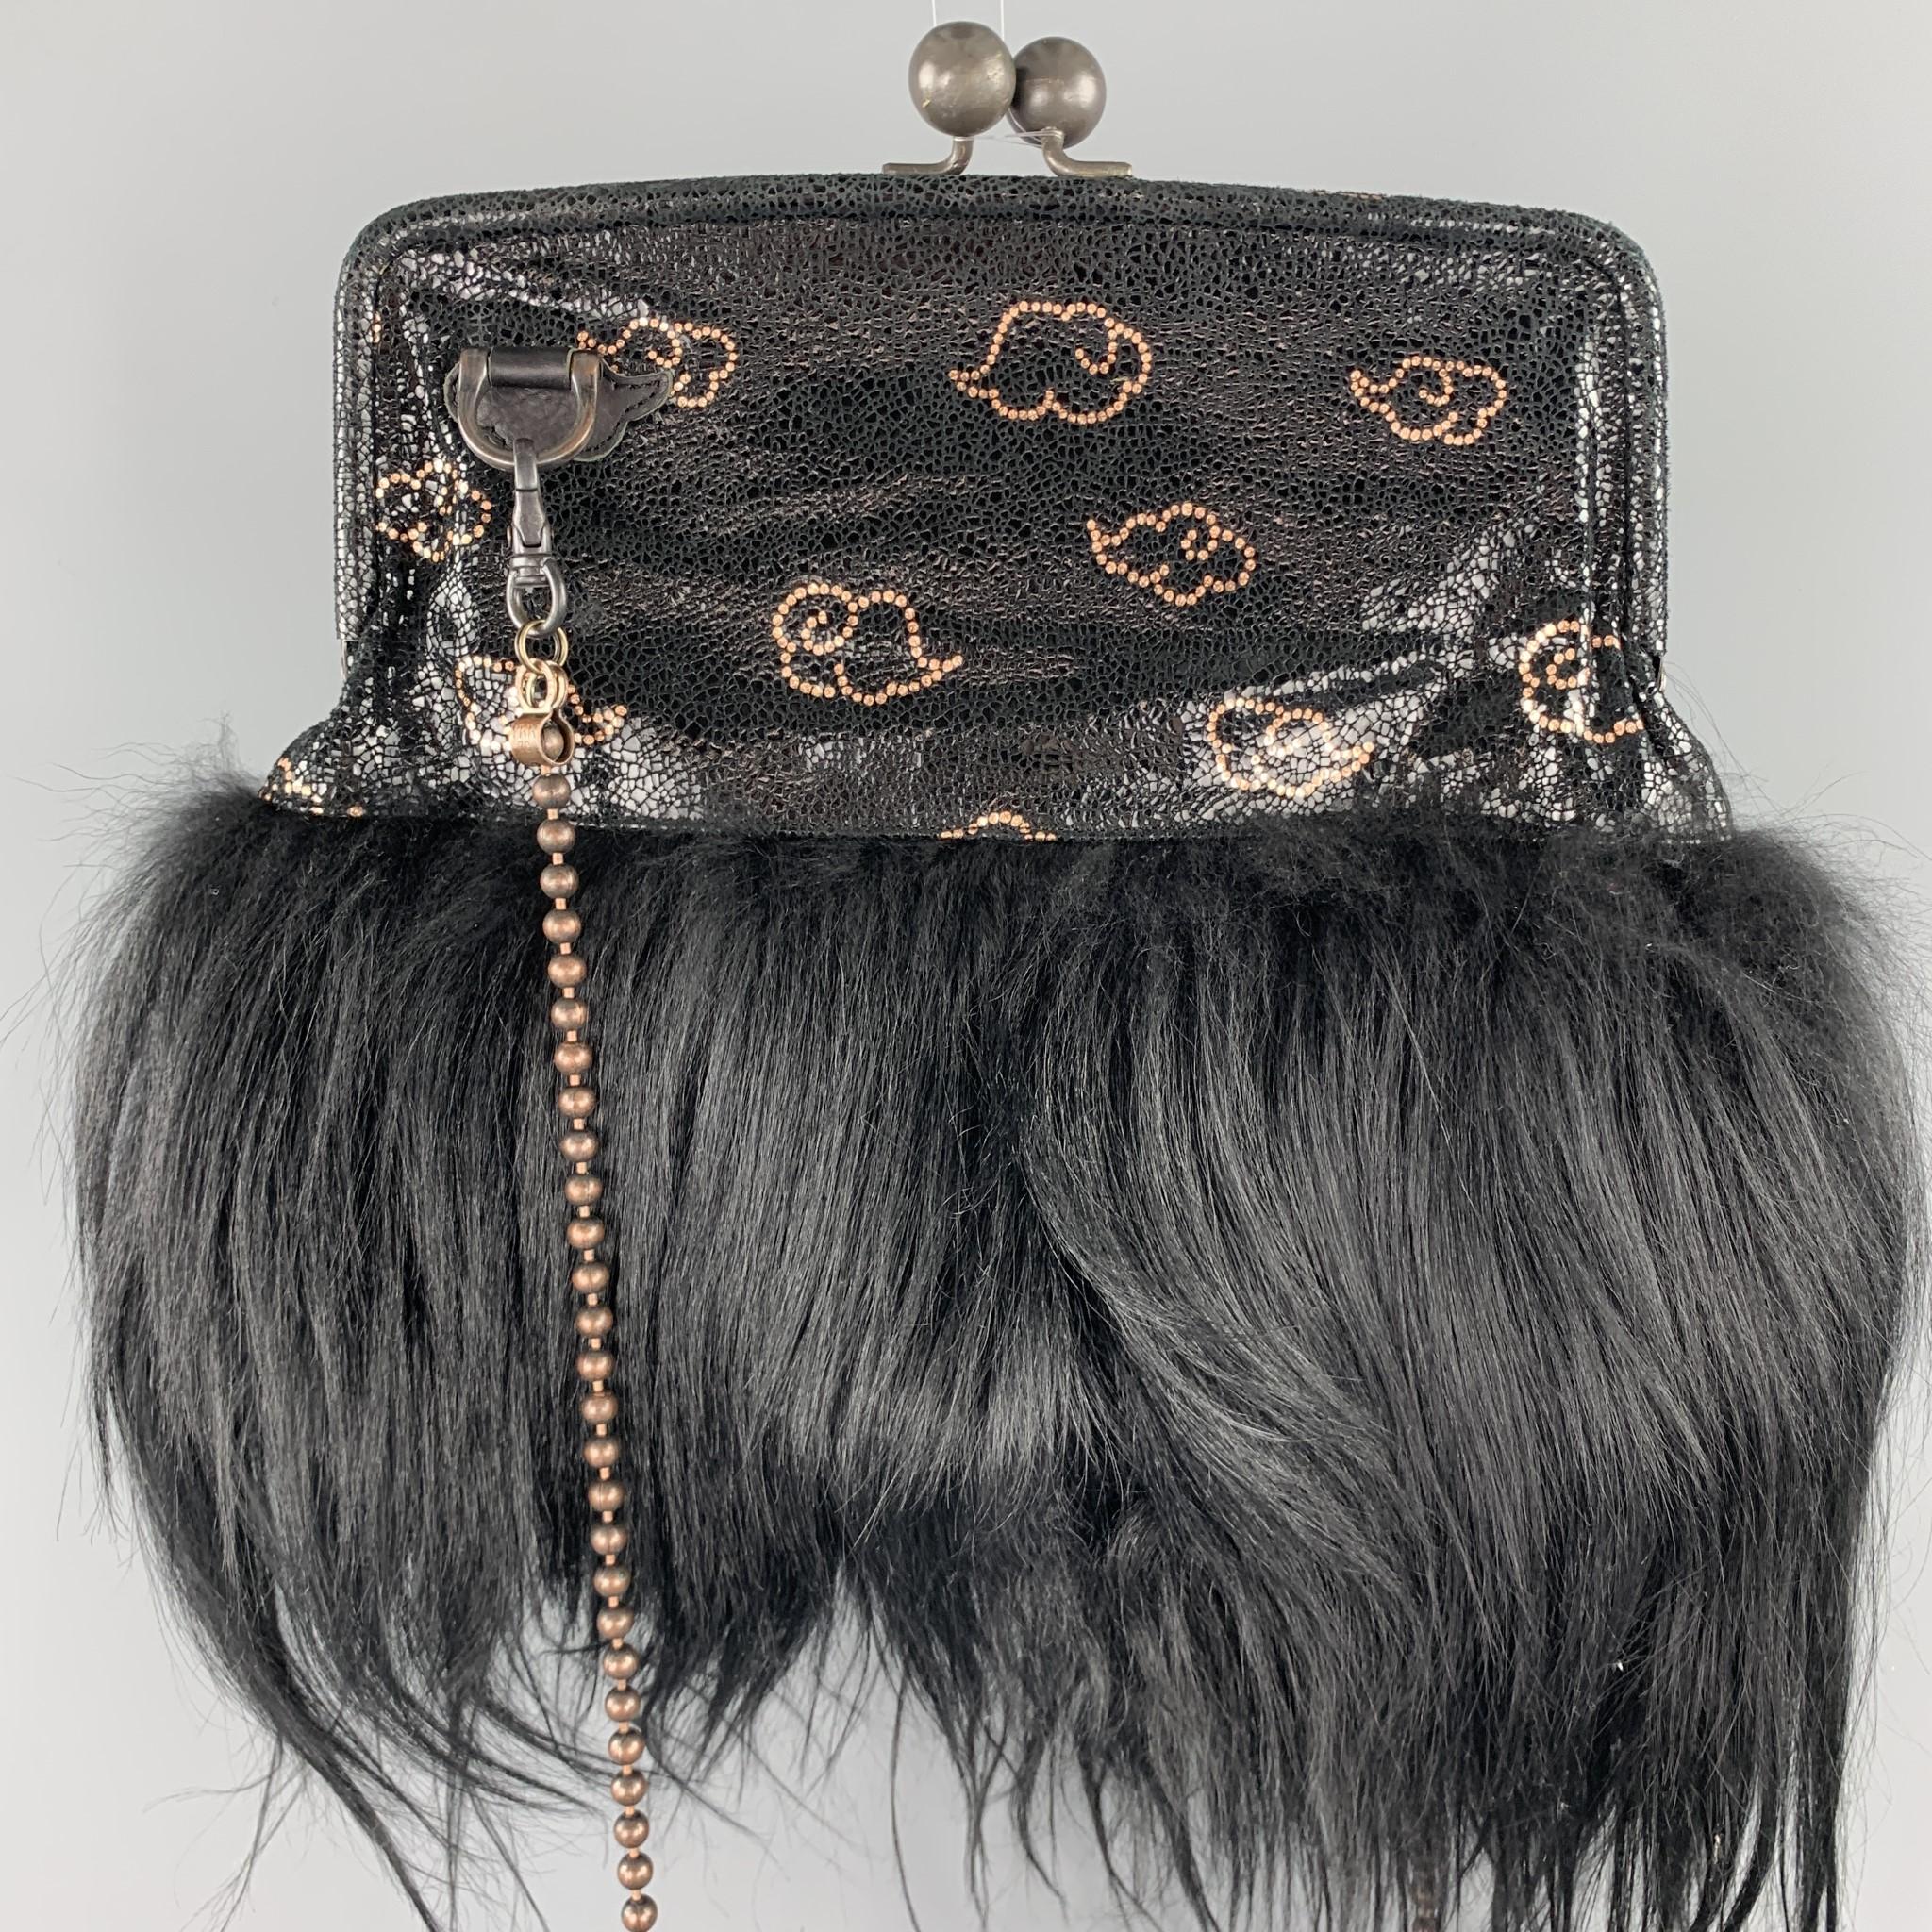 TSUMORI CHISATO kiss lock bag comes in black textured leather with a metallic copper print, detachable bronze ball chain strap, and goat hair trim. Wear throughout. 

Very Good Pre-Owned Condition.

Measurements:

Length:10 in.
Width: 1 in.
Height: